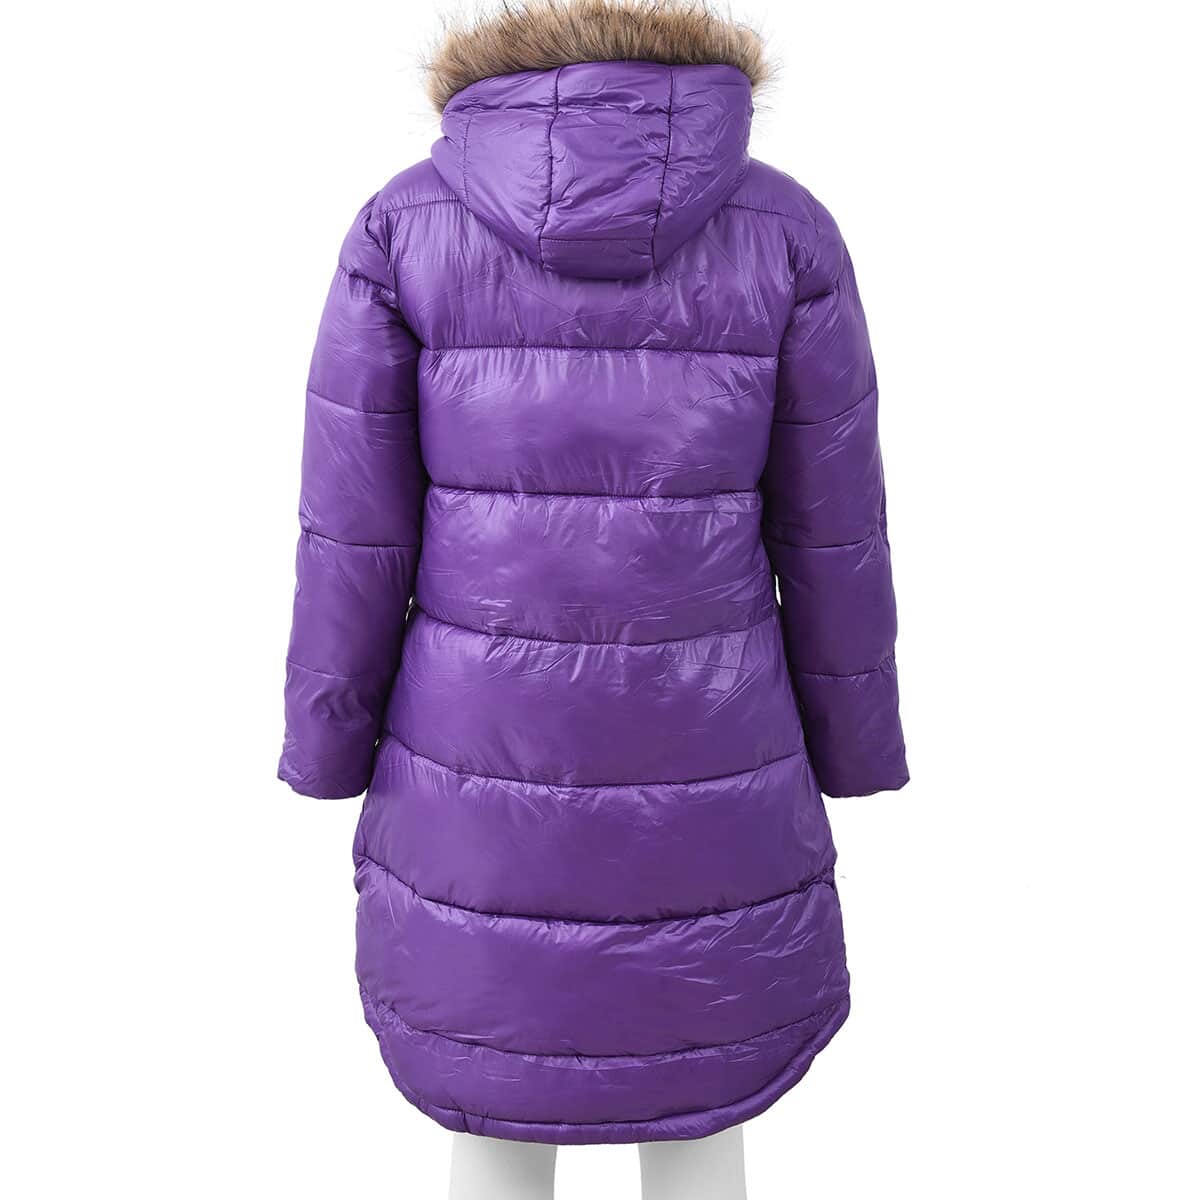 Purple Women's Puffer Jacket with Faux Fur Hood and Pockets - L (Nylon/Polyester) image number 1